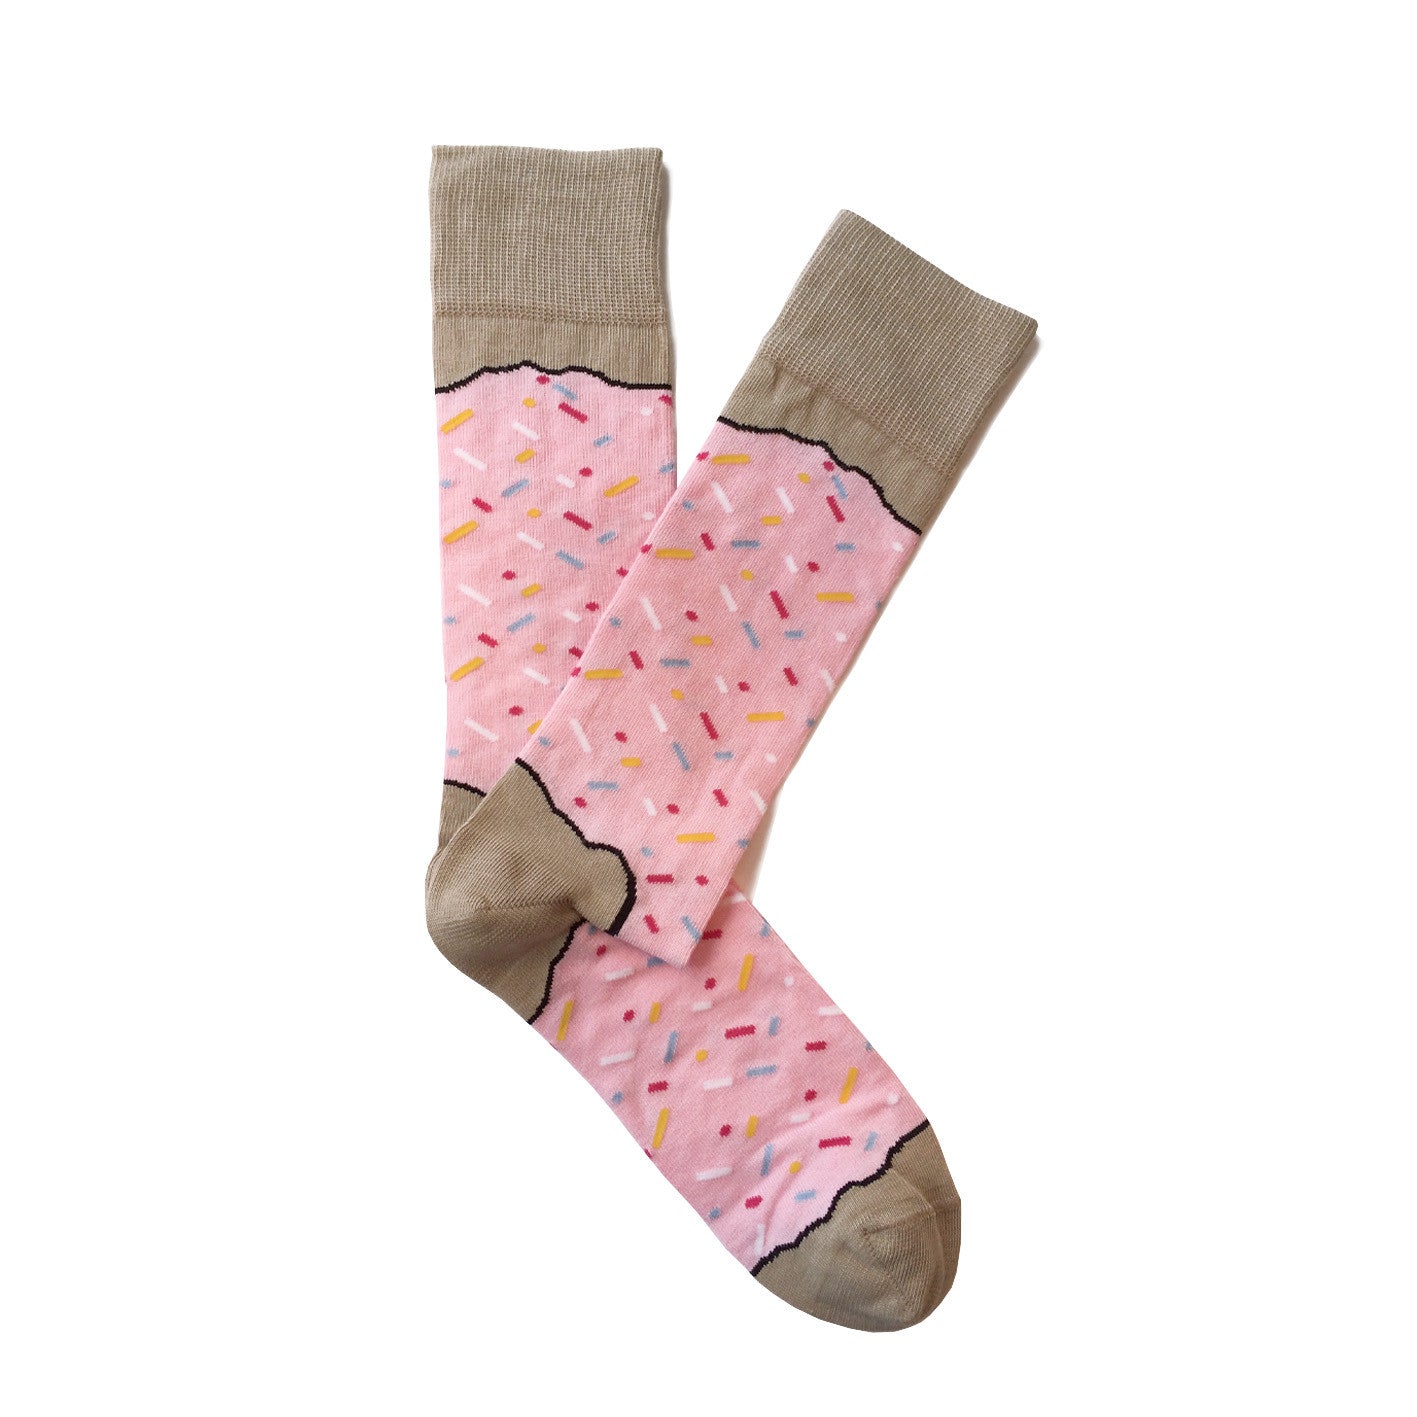 Giraffecool-giraffe-cool-brand-strawberry-donut-pink-light-cream-and-colour-sparkles-Mercerized-And-Brushed-Cotton-Fashion-Socks-Open-Pair